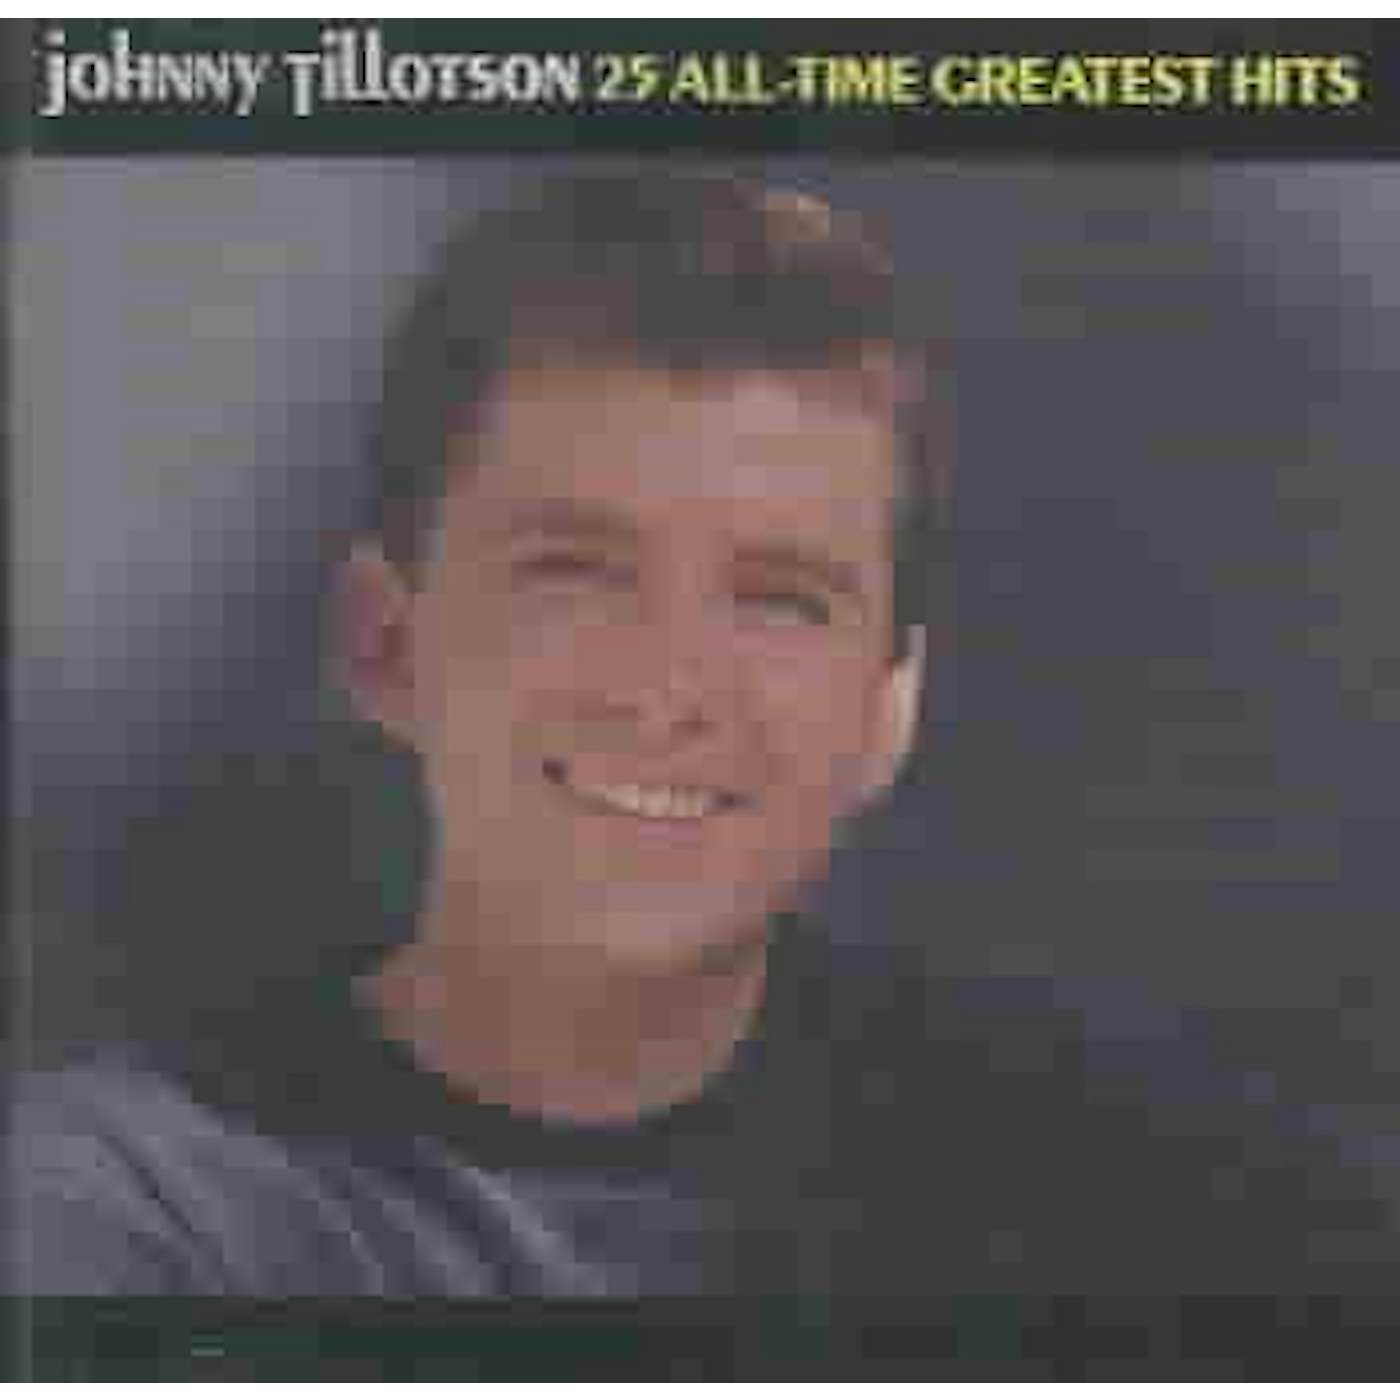 Johnny Tillotson 25 All-Time Greatest Hits CD